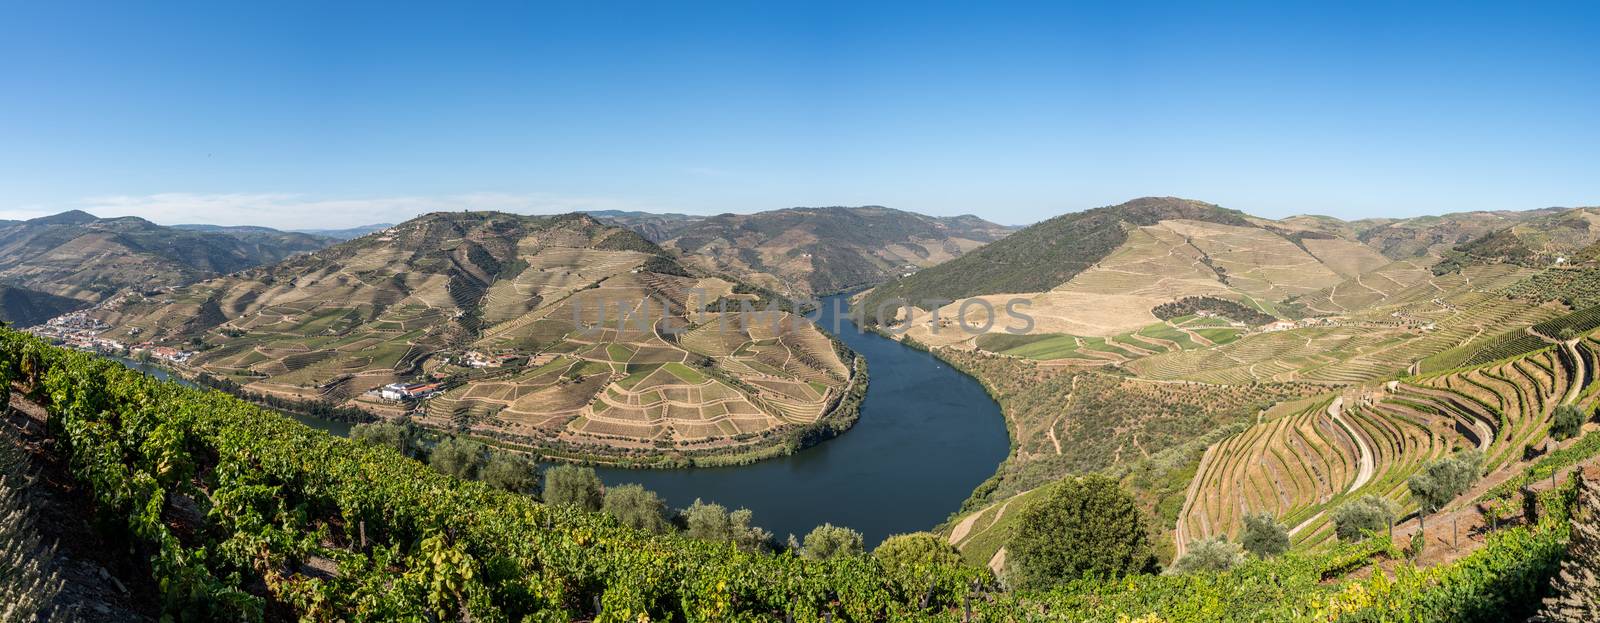 Rows of grape vines line the valley of the River Douro in Portugal by steheap